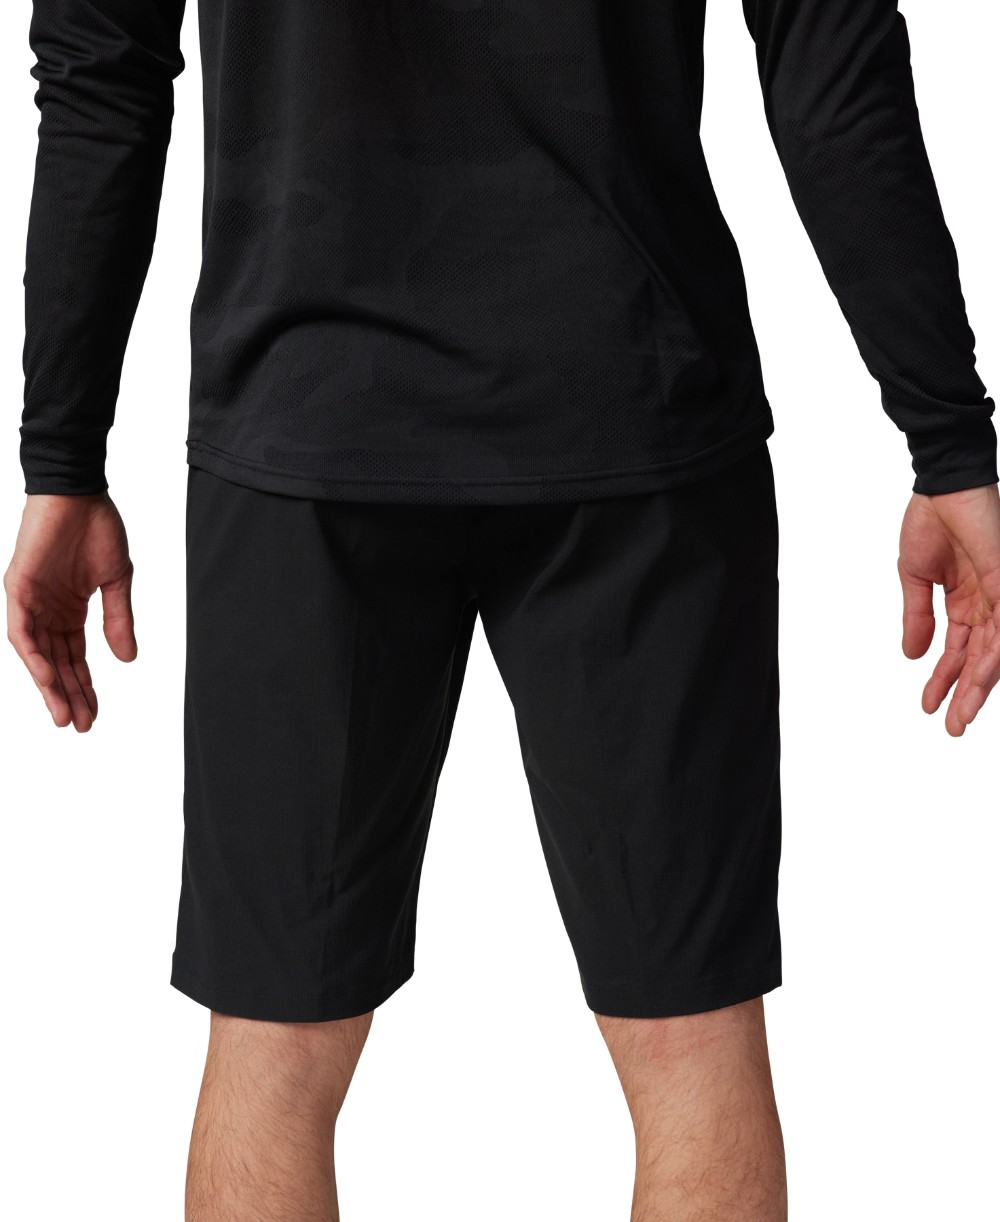 Ranger MTB Shorts with Liner image 1